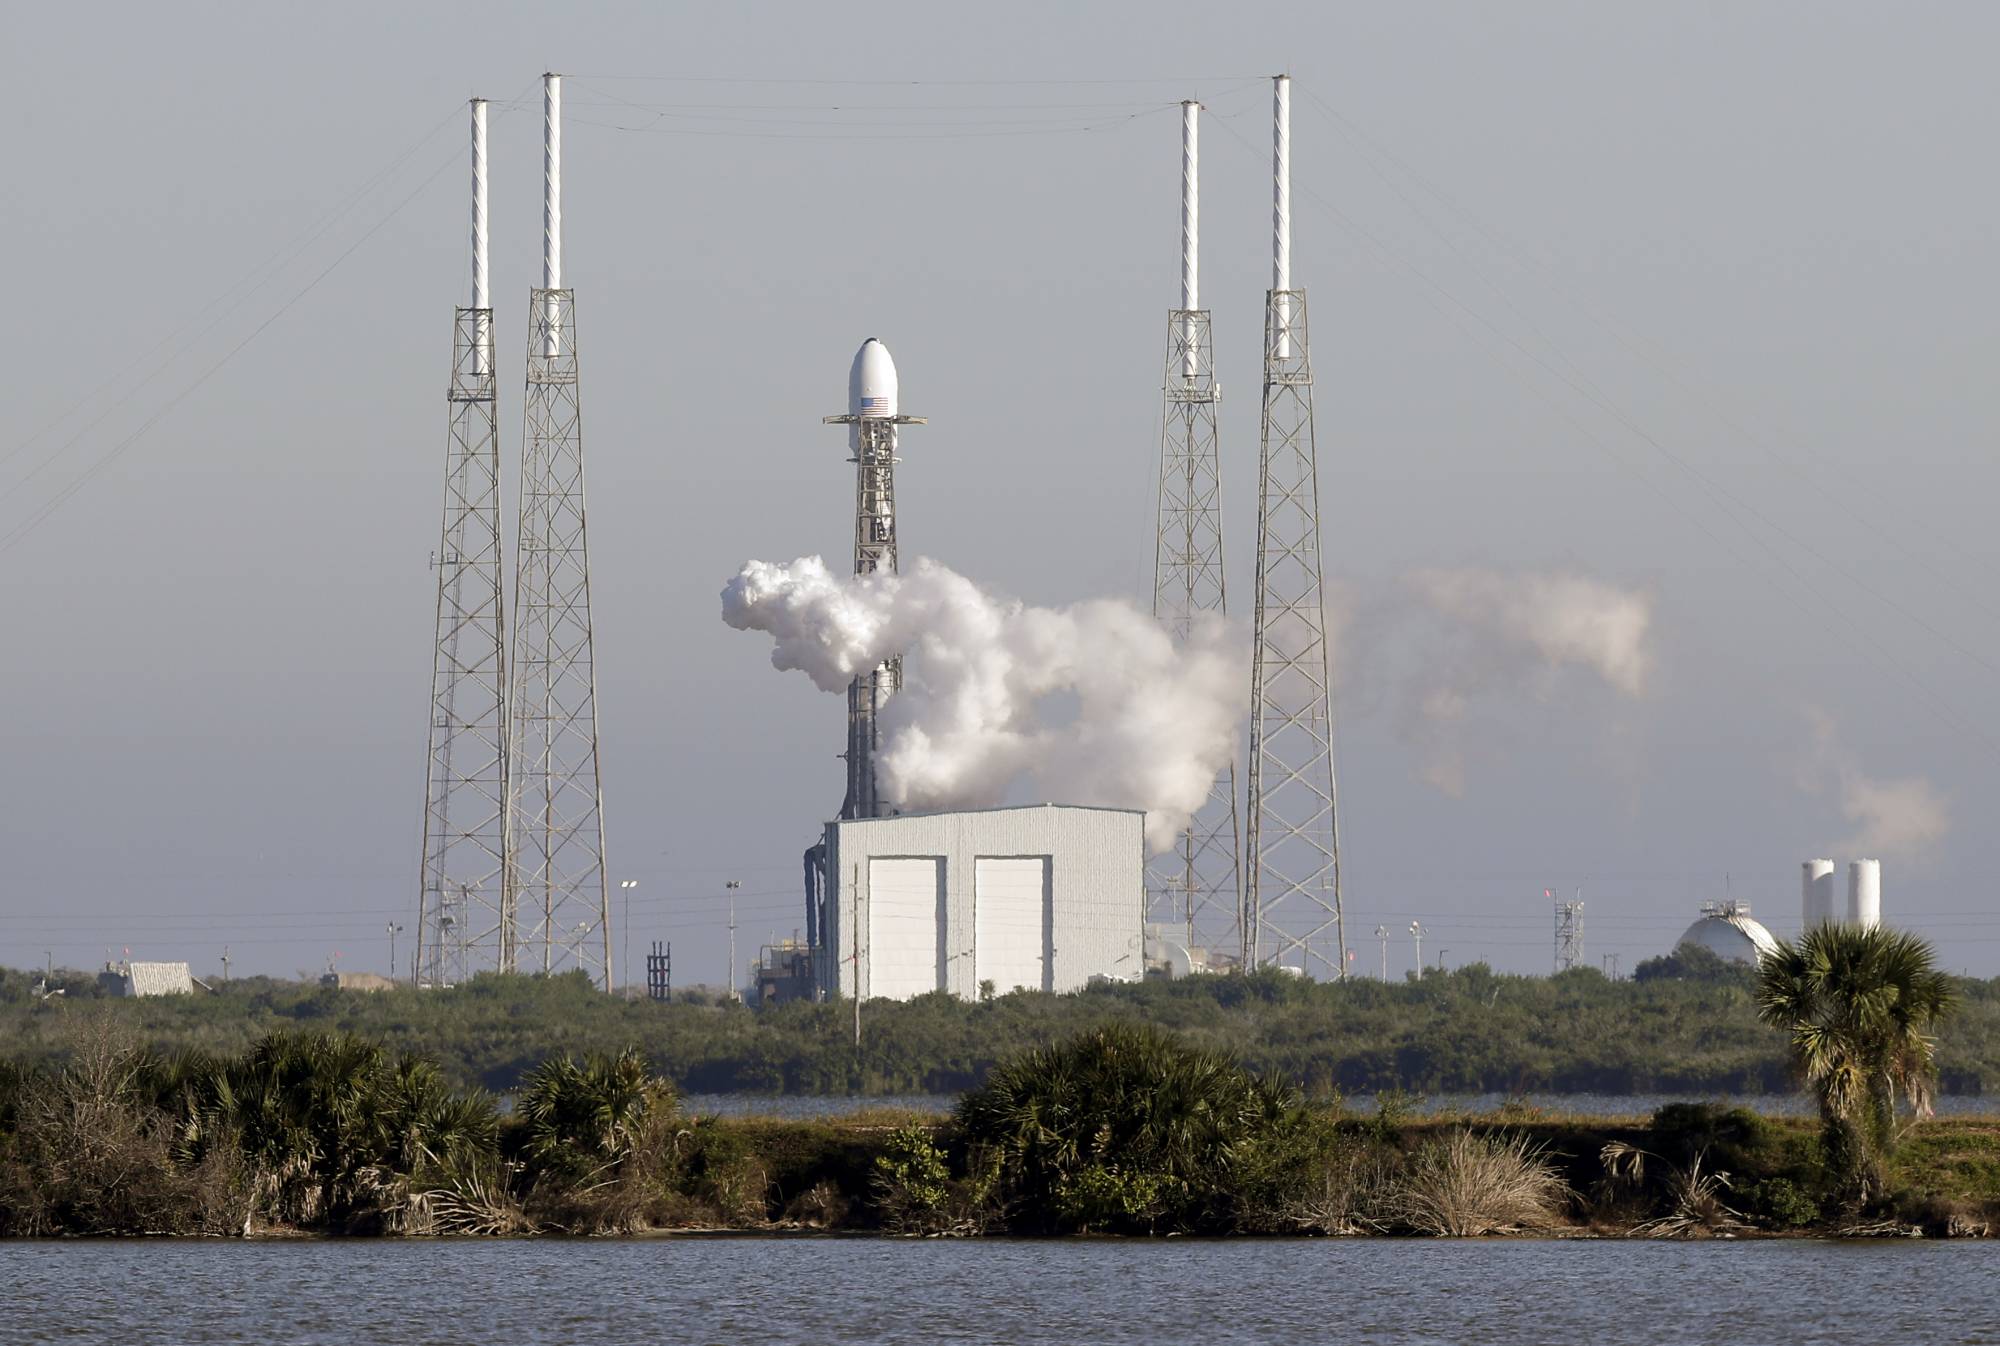 A Falcon 9 SpaceX rocket, stands ready at space launch complex 40, shortly before the launch was scrubbed because of a technical issue at the Cape Canaveral Air Force Station in Cape Canaveral, Fla., Tuesday, Dec. 18, 2018. The payload on the rocket is the U.S. Air Force's first Global Positioning System III space vehicle and the system will augment 31 current operational GPS satellites. (AP Photo/John Raoux)